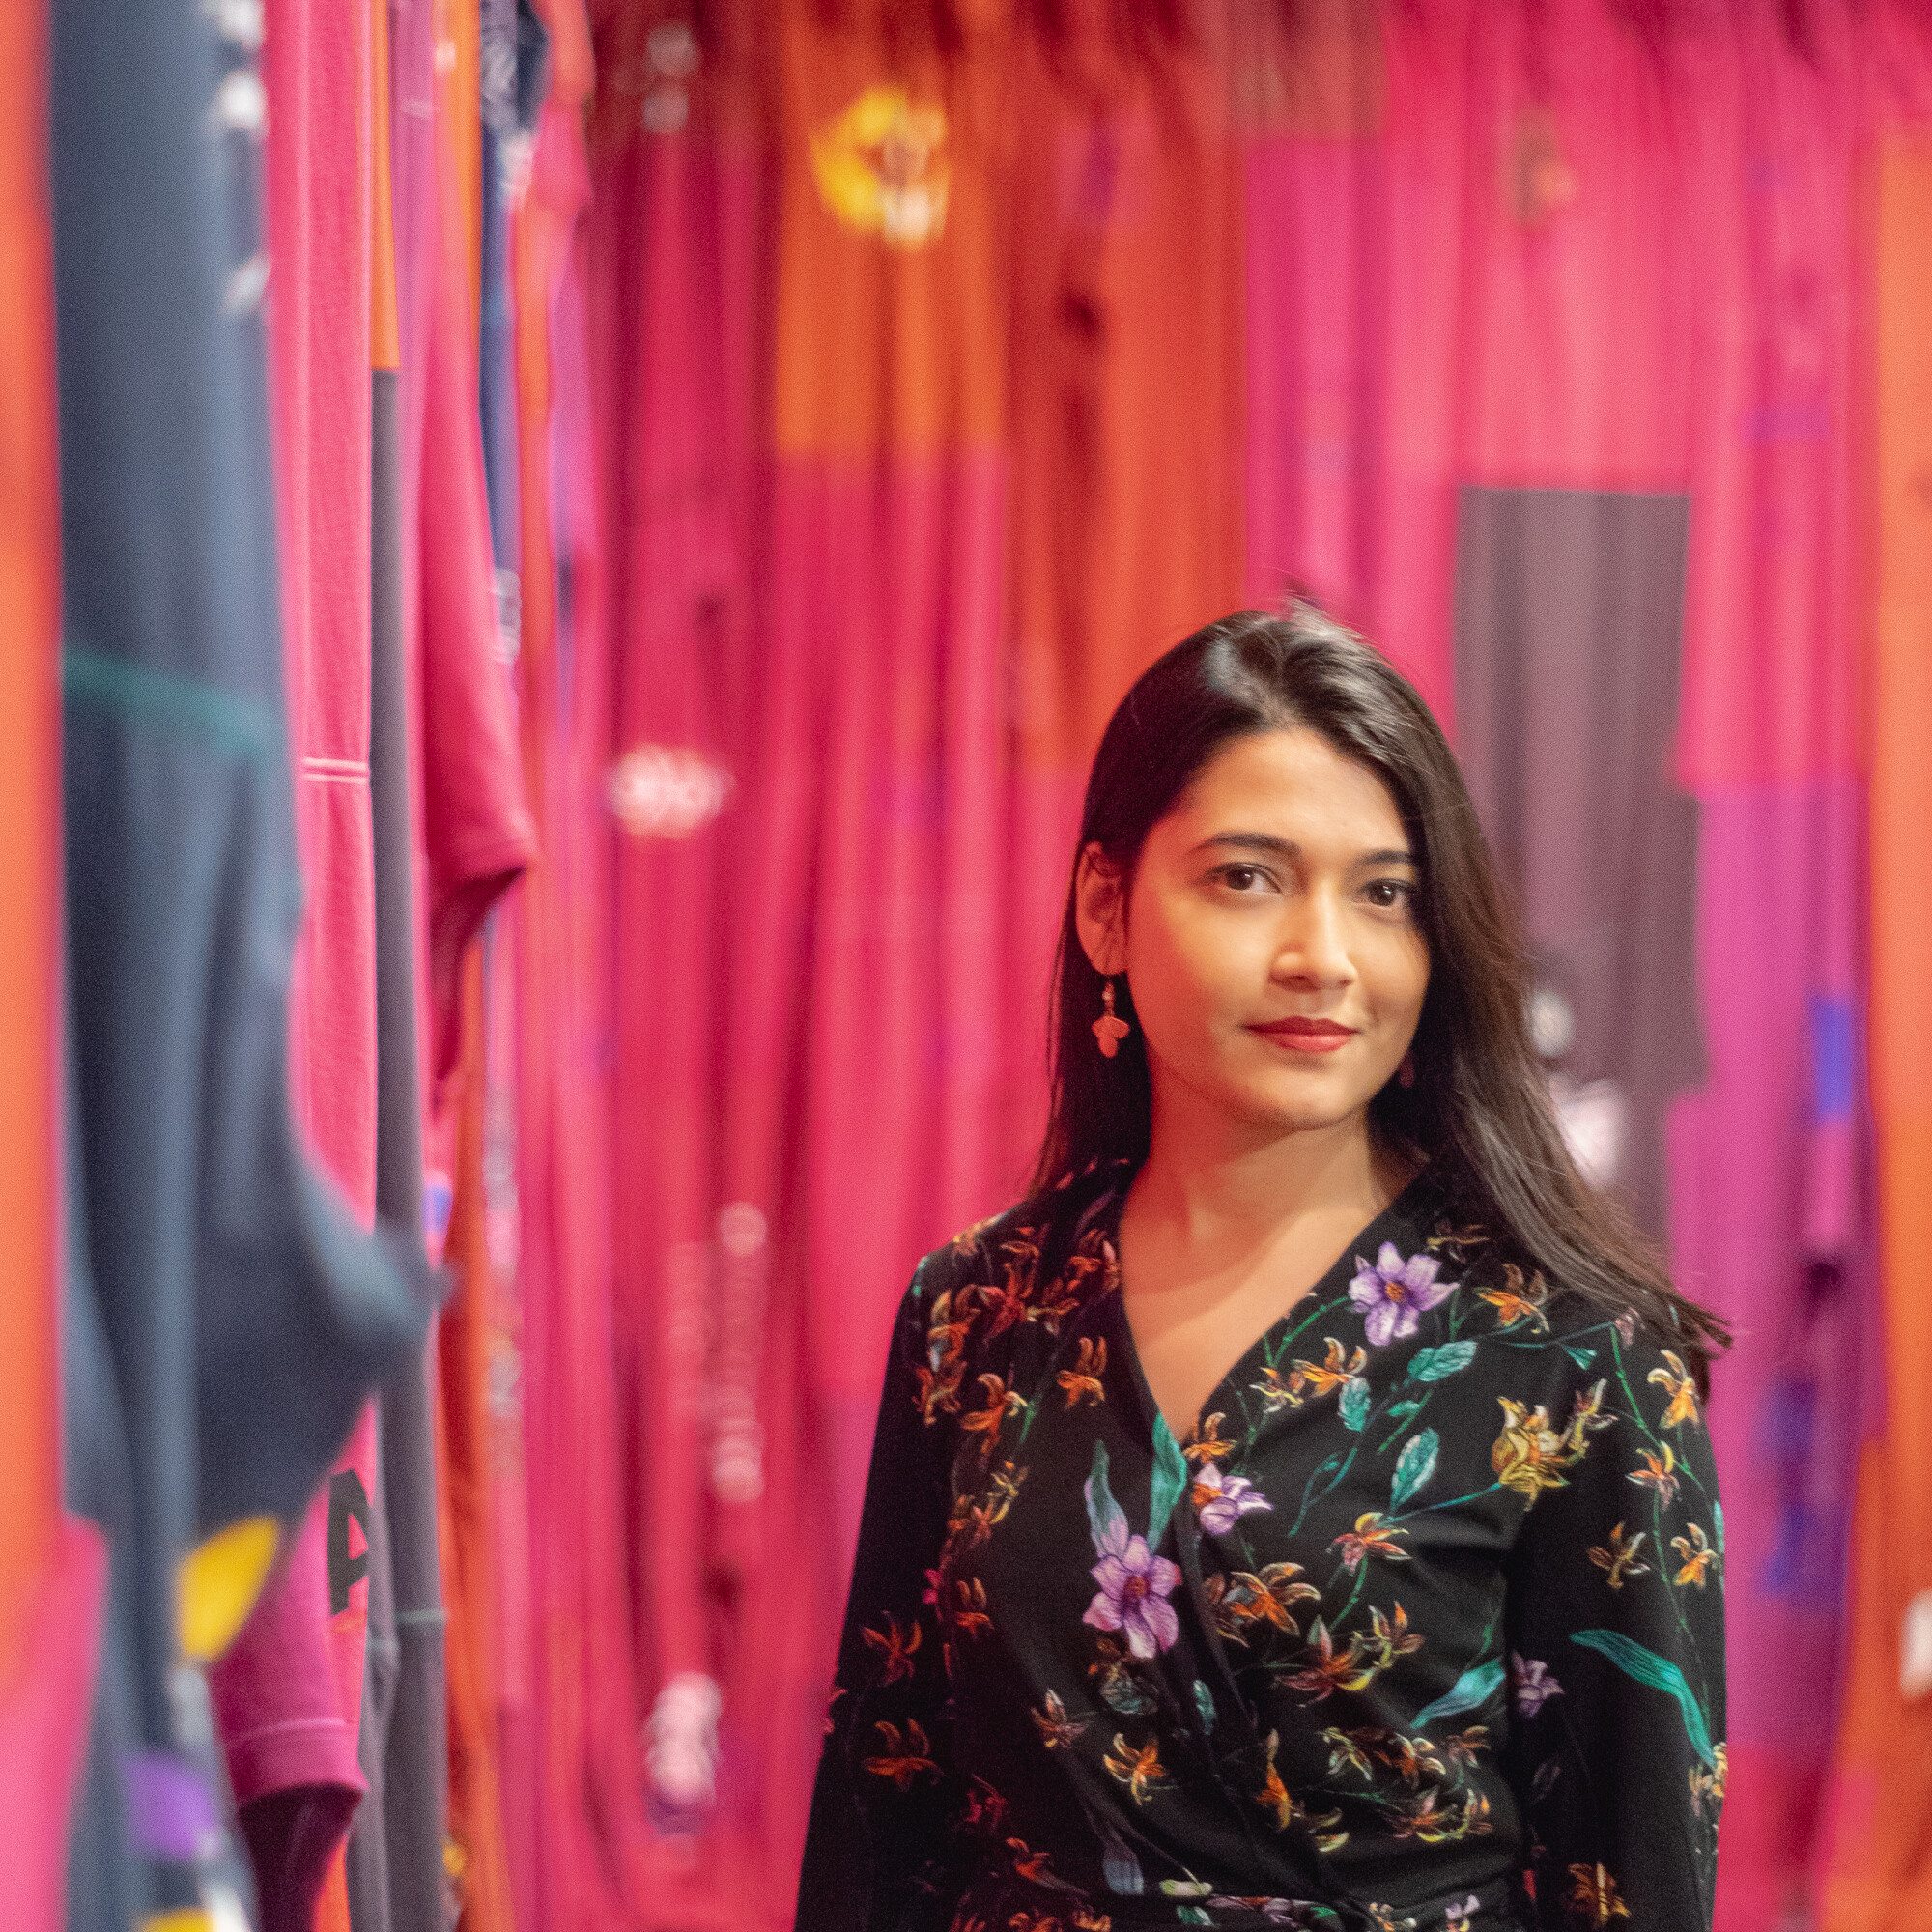 A photograph shows a woman with a medium skin tone and long black hair wearing a black blouse with a colorful flowers print. Her head is slightly tilted to the right and she is smiling softly. In the background is a wall covered in pink and red textiles.